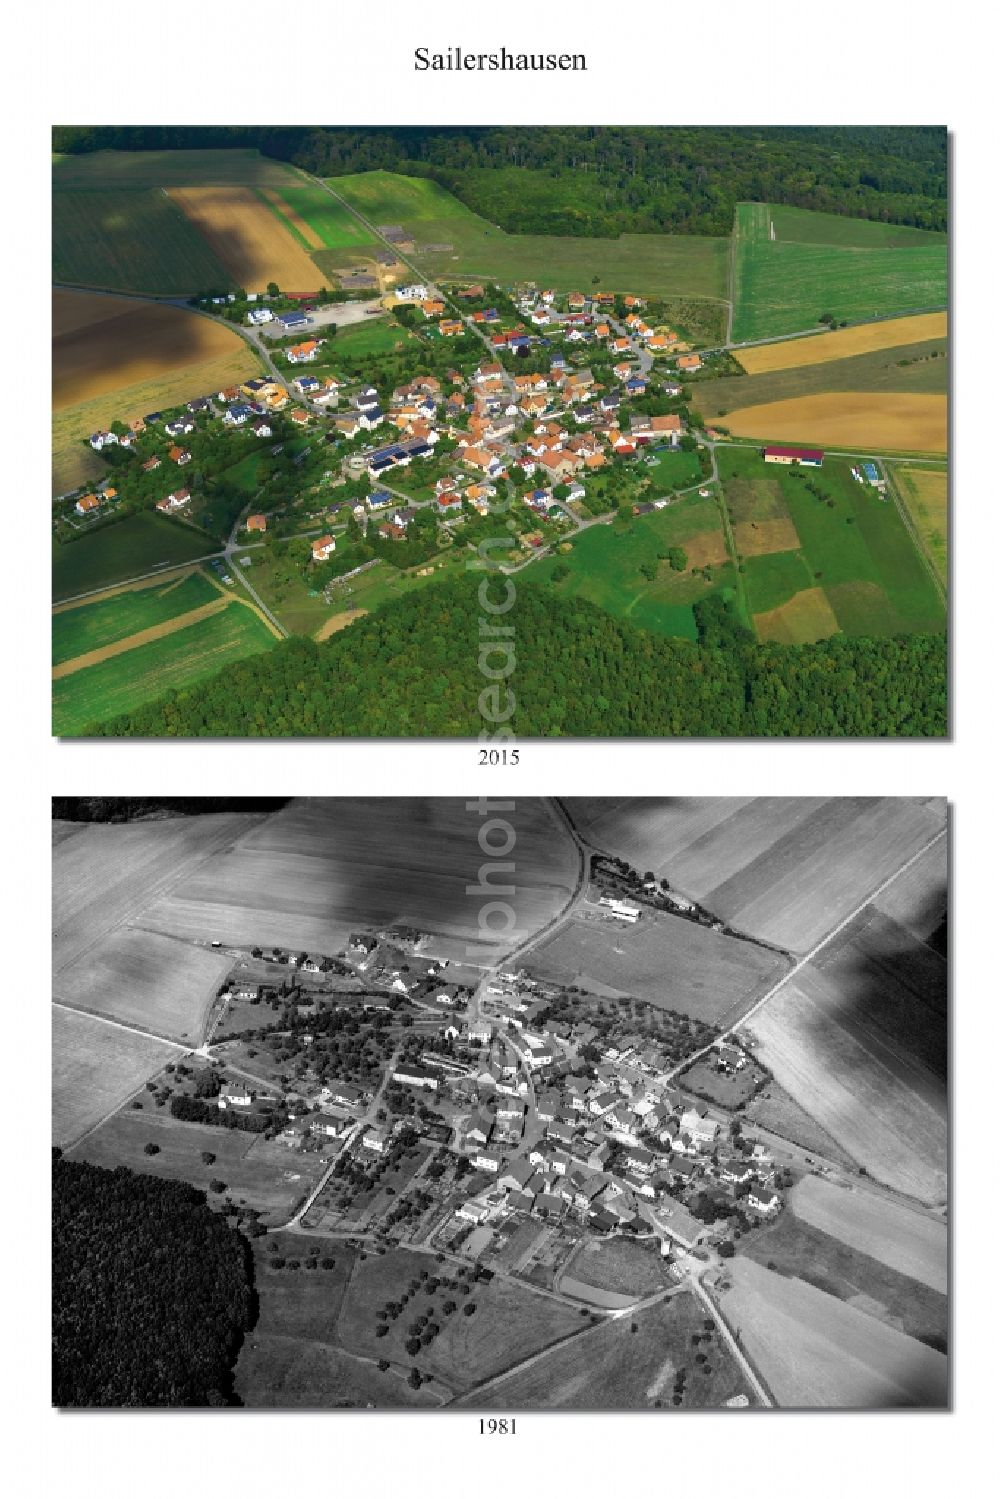 Sailershausen from above - 1981 and 2015 village - view change of Sailershausen in the state Bavaria